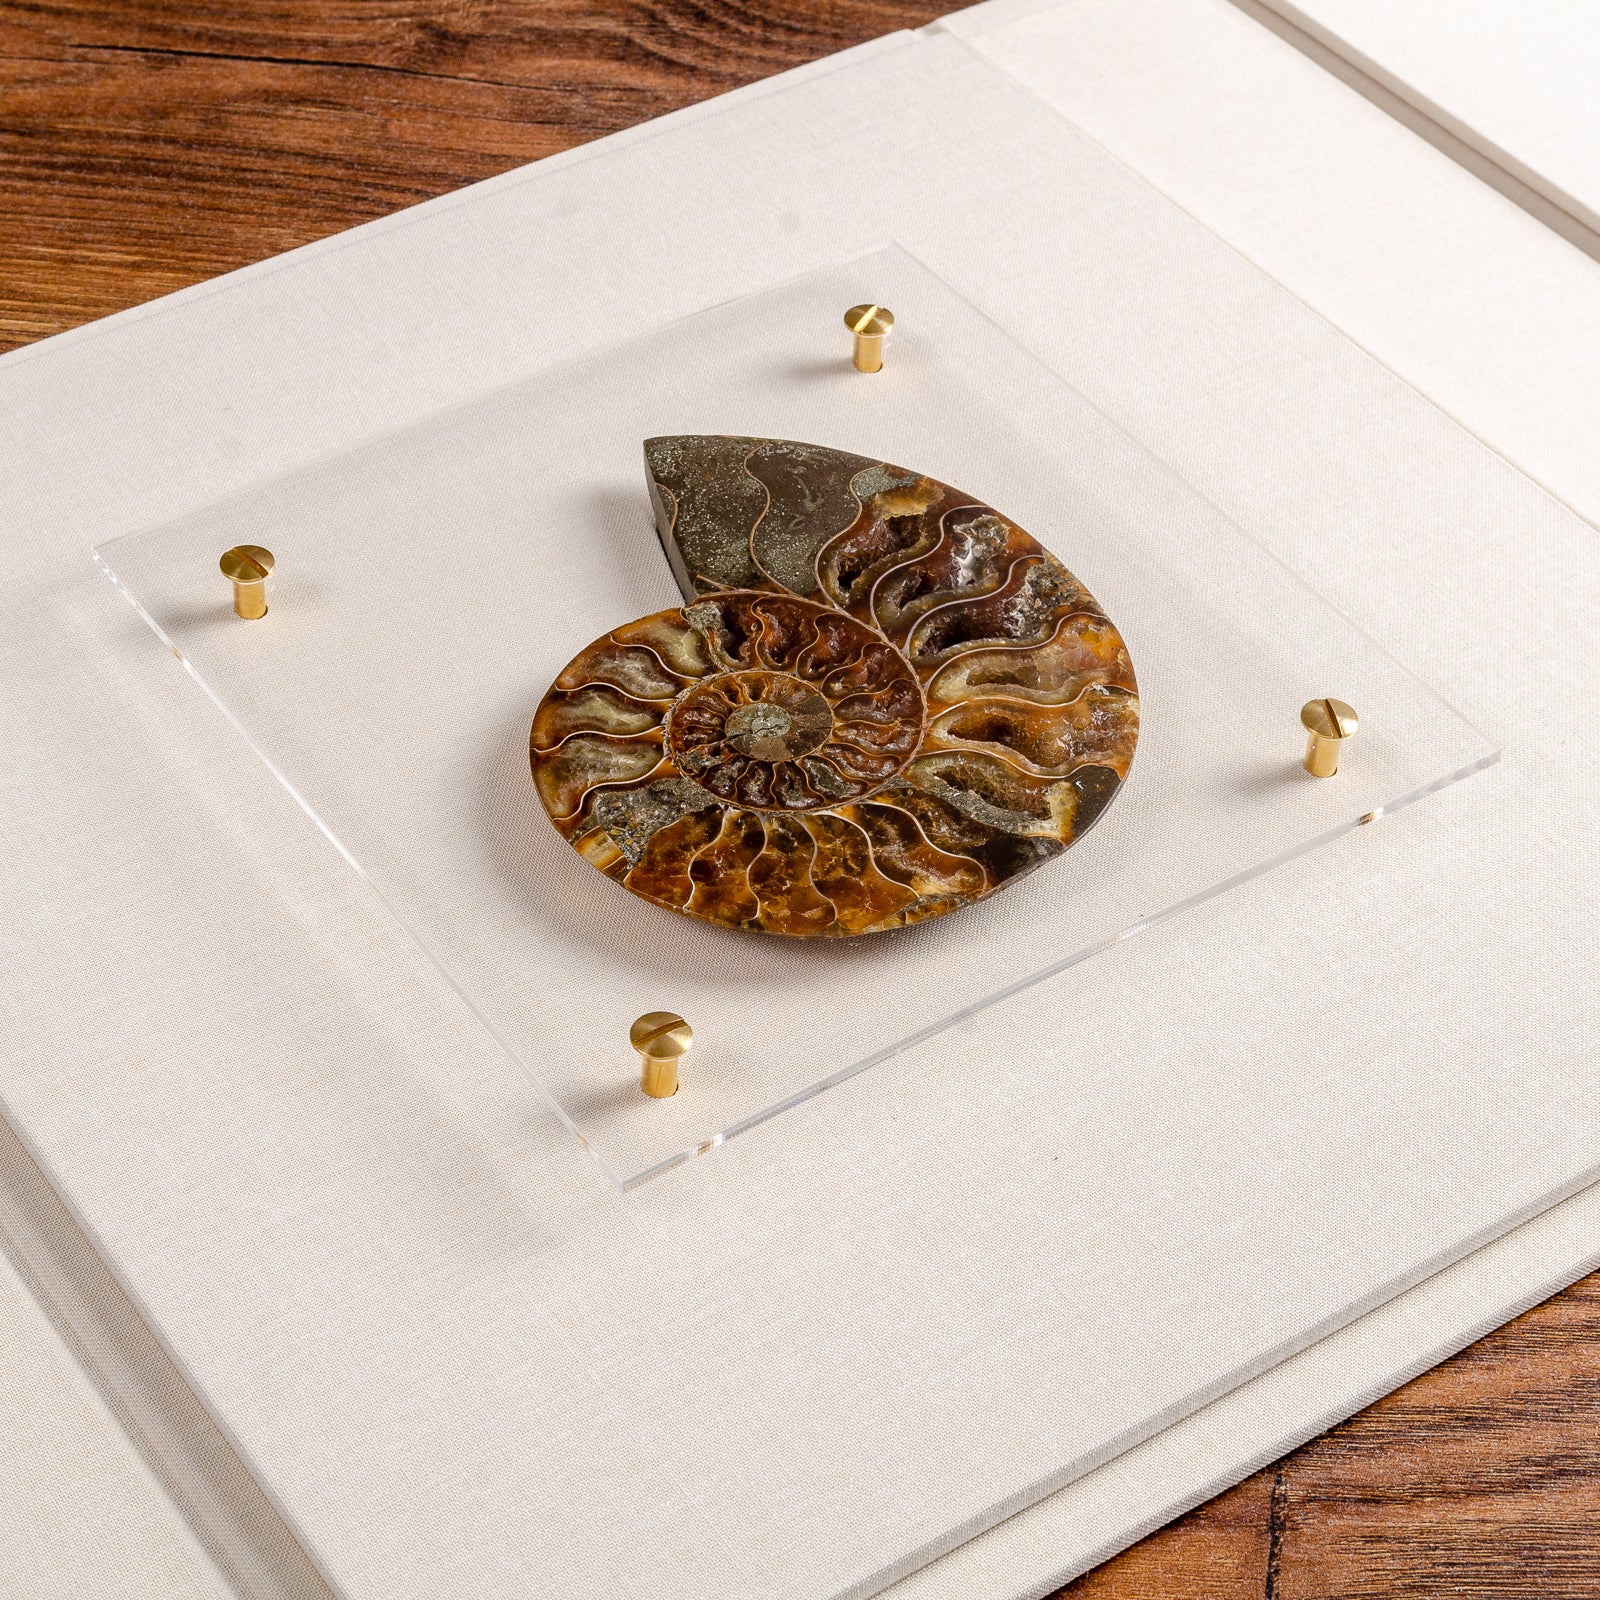 Presentation box with ammonite stone fixed and held into inner cover of clamshell lid